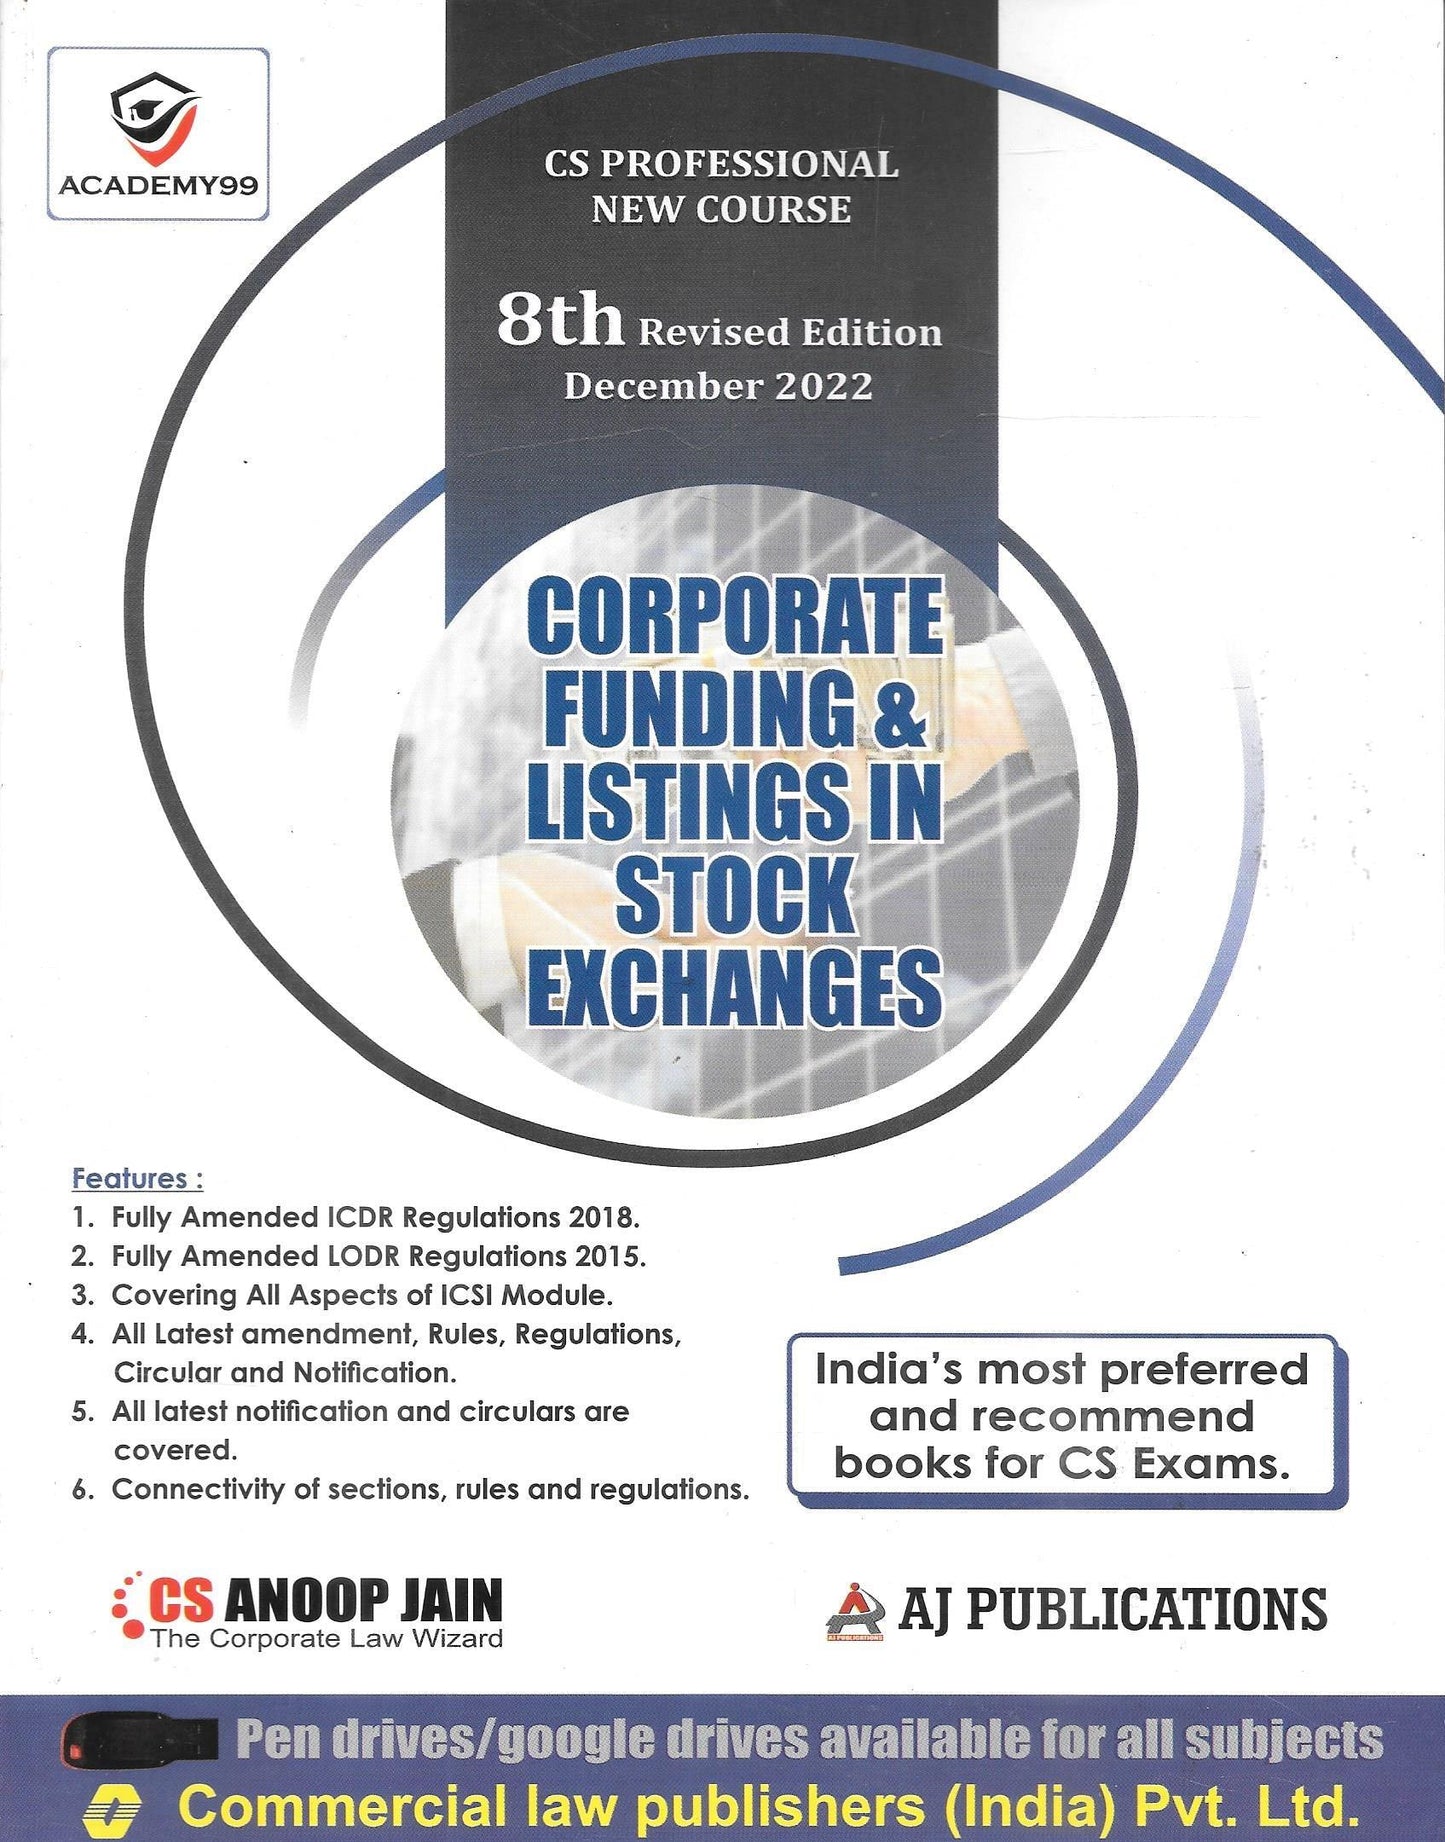 Corporate Funding and Listing in Stocks Exchanges for CS Professional New Course